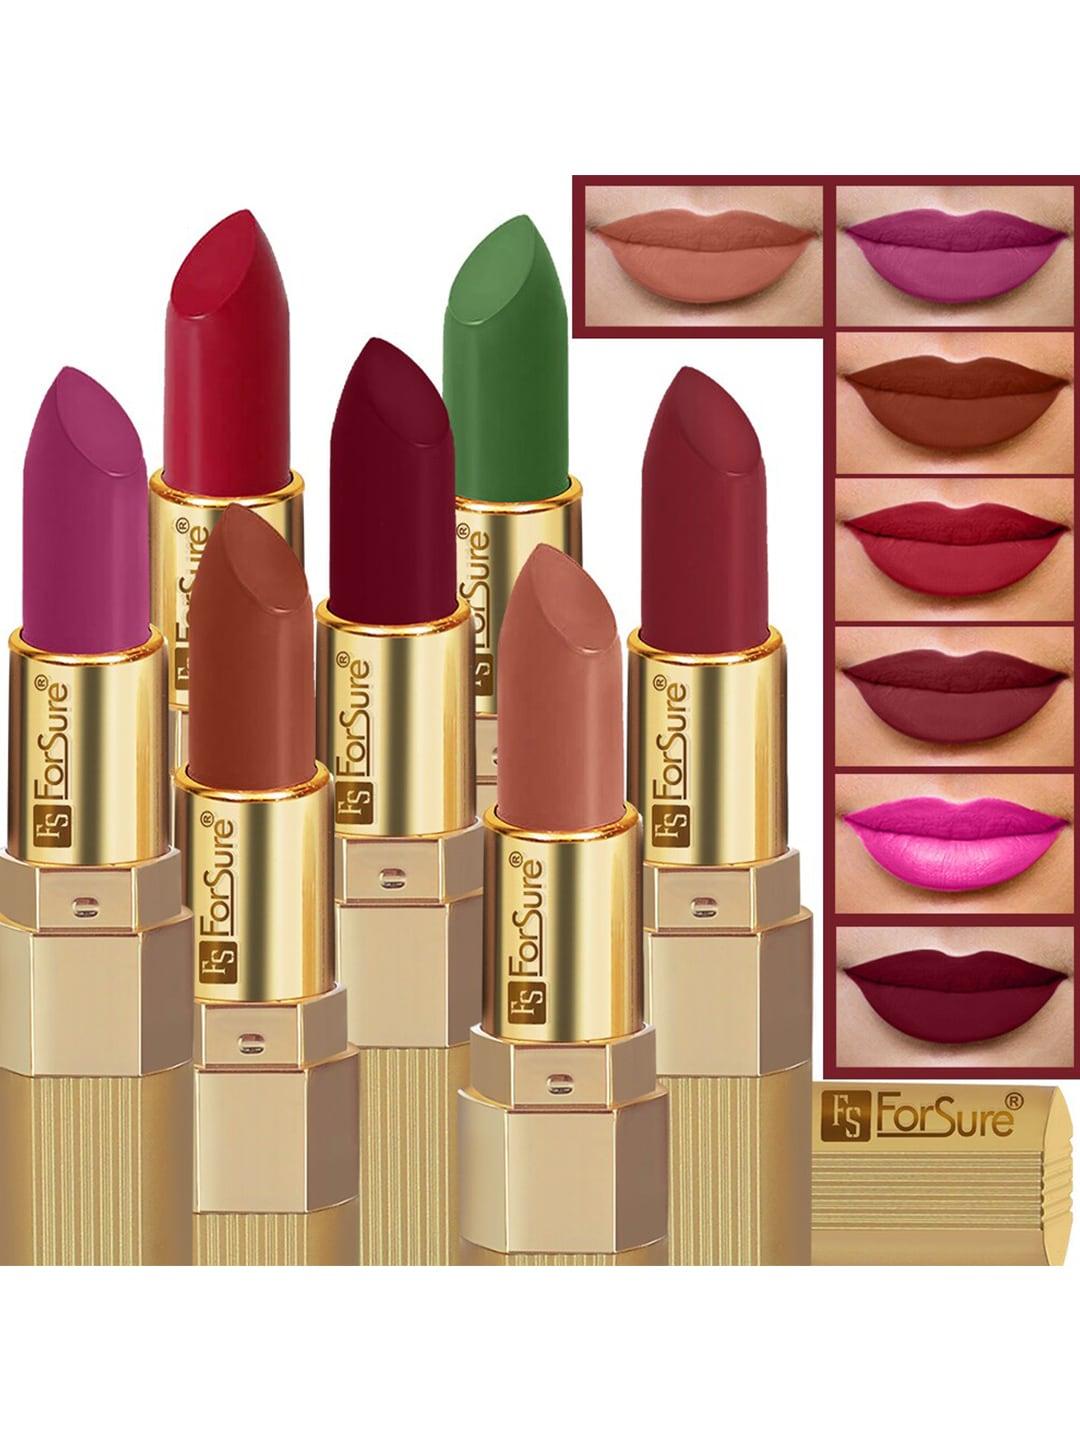 ForSure Set Of 7 Xpression Long Lasting Highly Pigmented Creamy Matte Lipstick - 3.5g Each